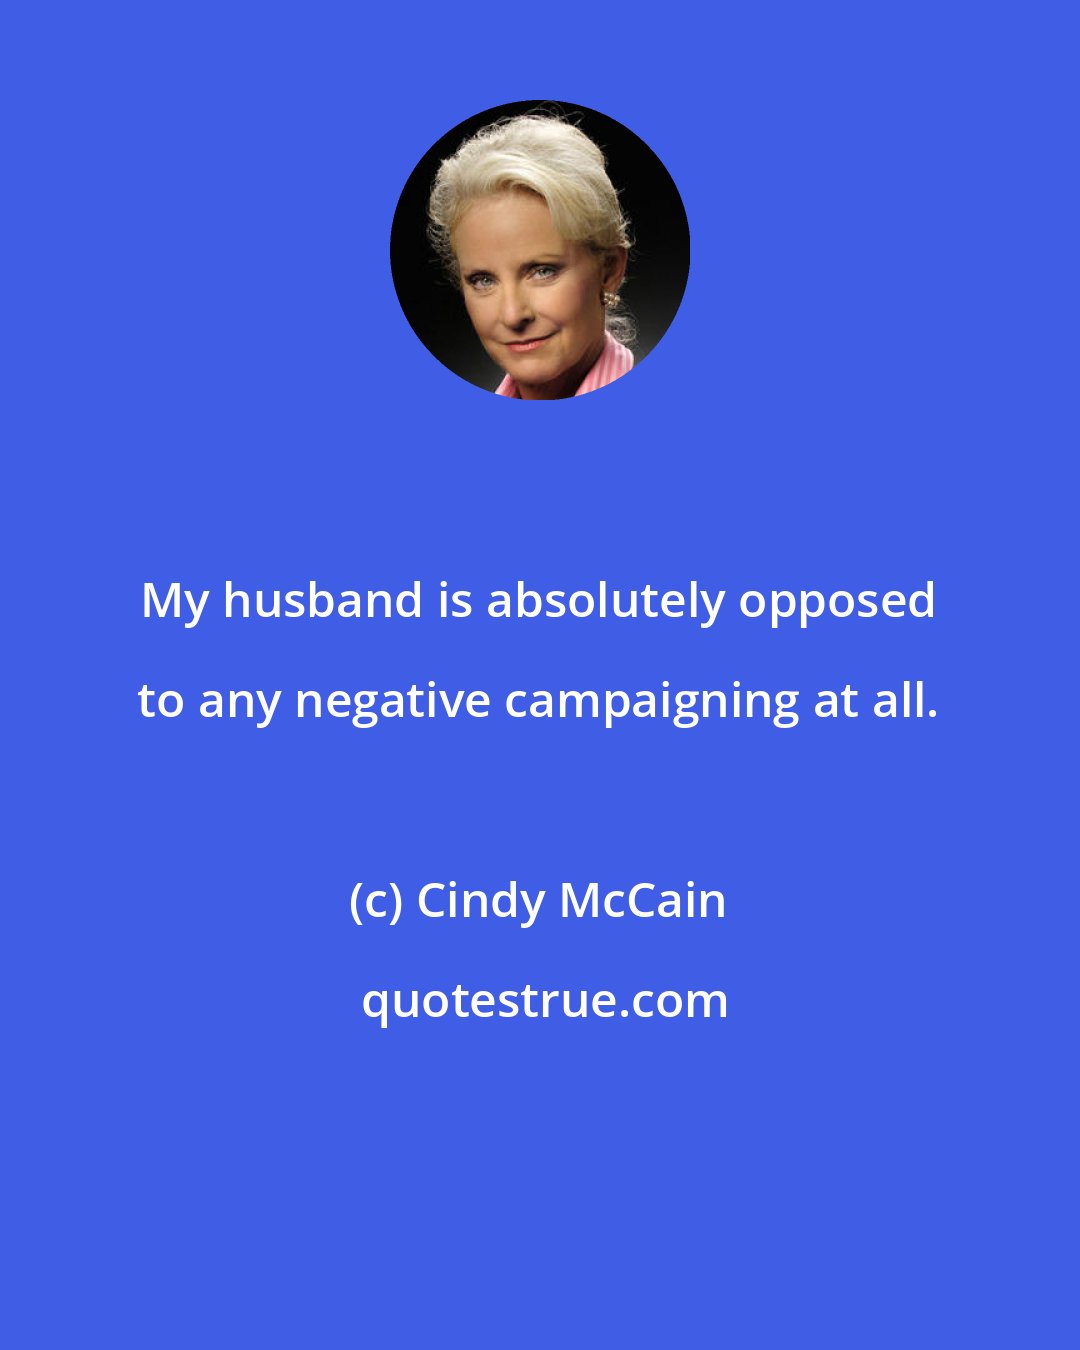 Cindy McCain: My husband is absolutely opposed to any negative campaigning at all.